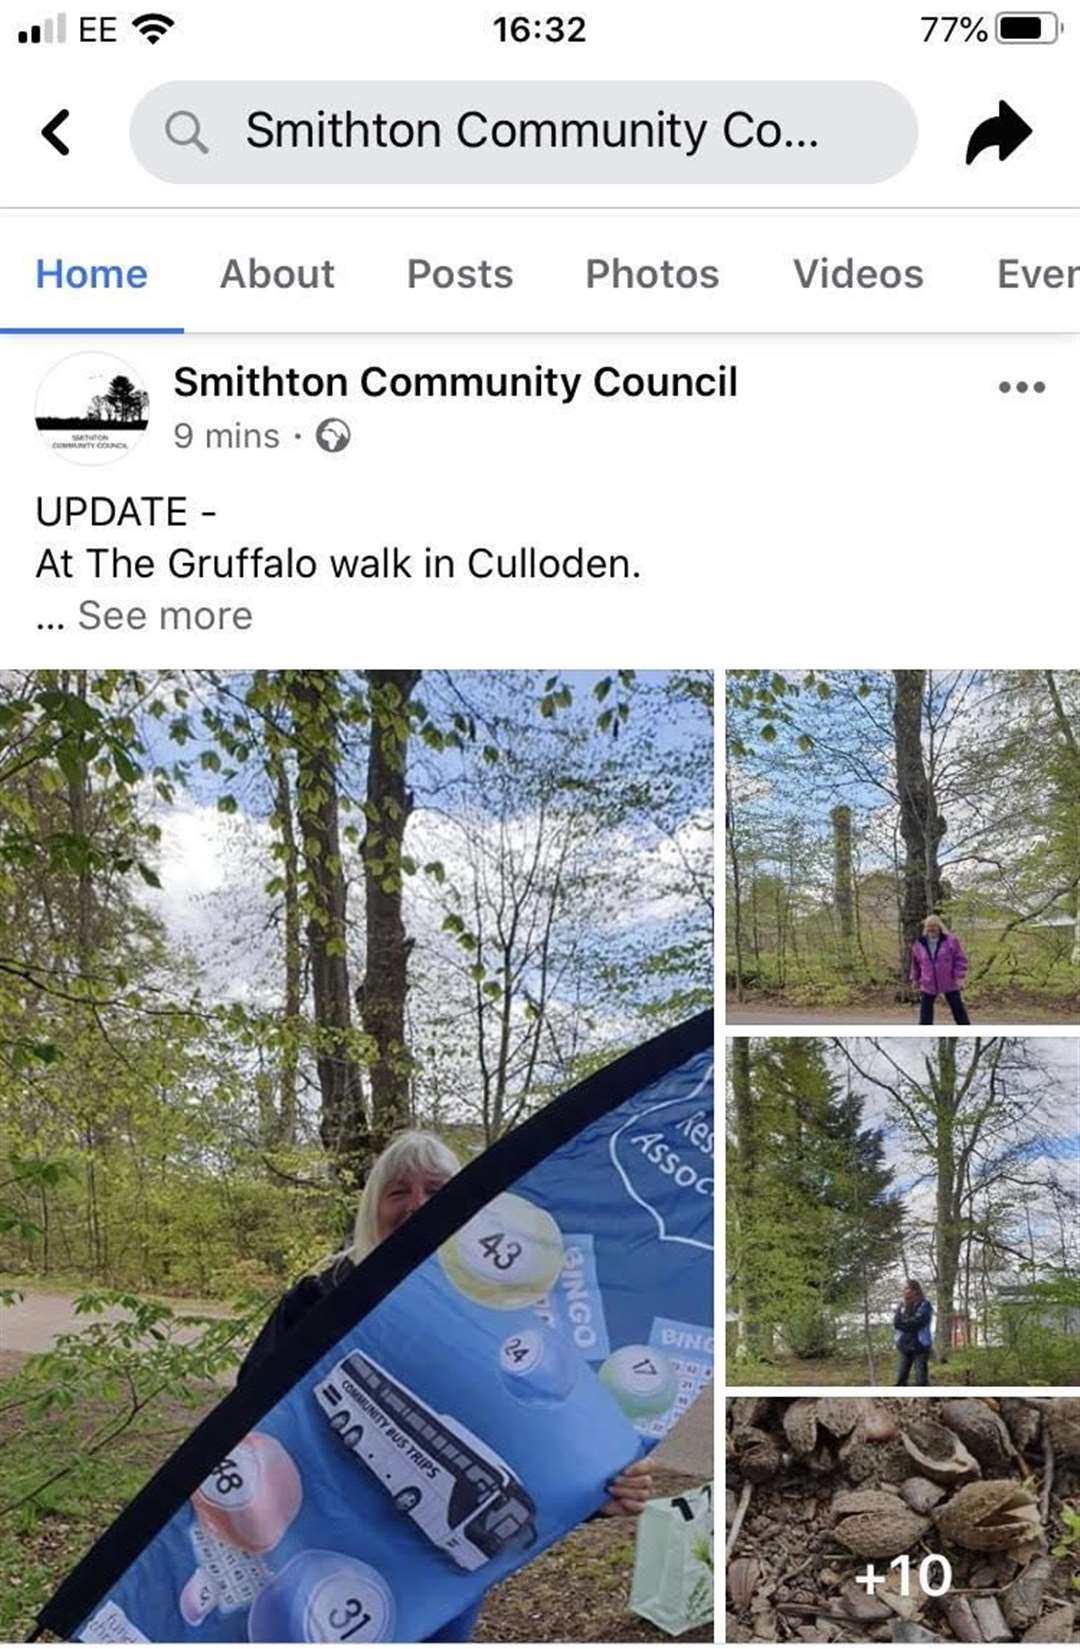 The Facebook post from Smithton Community Council.